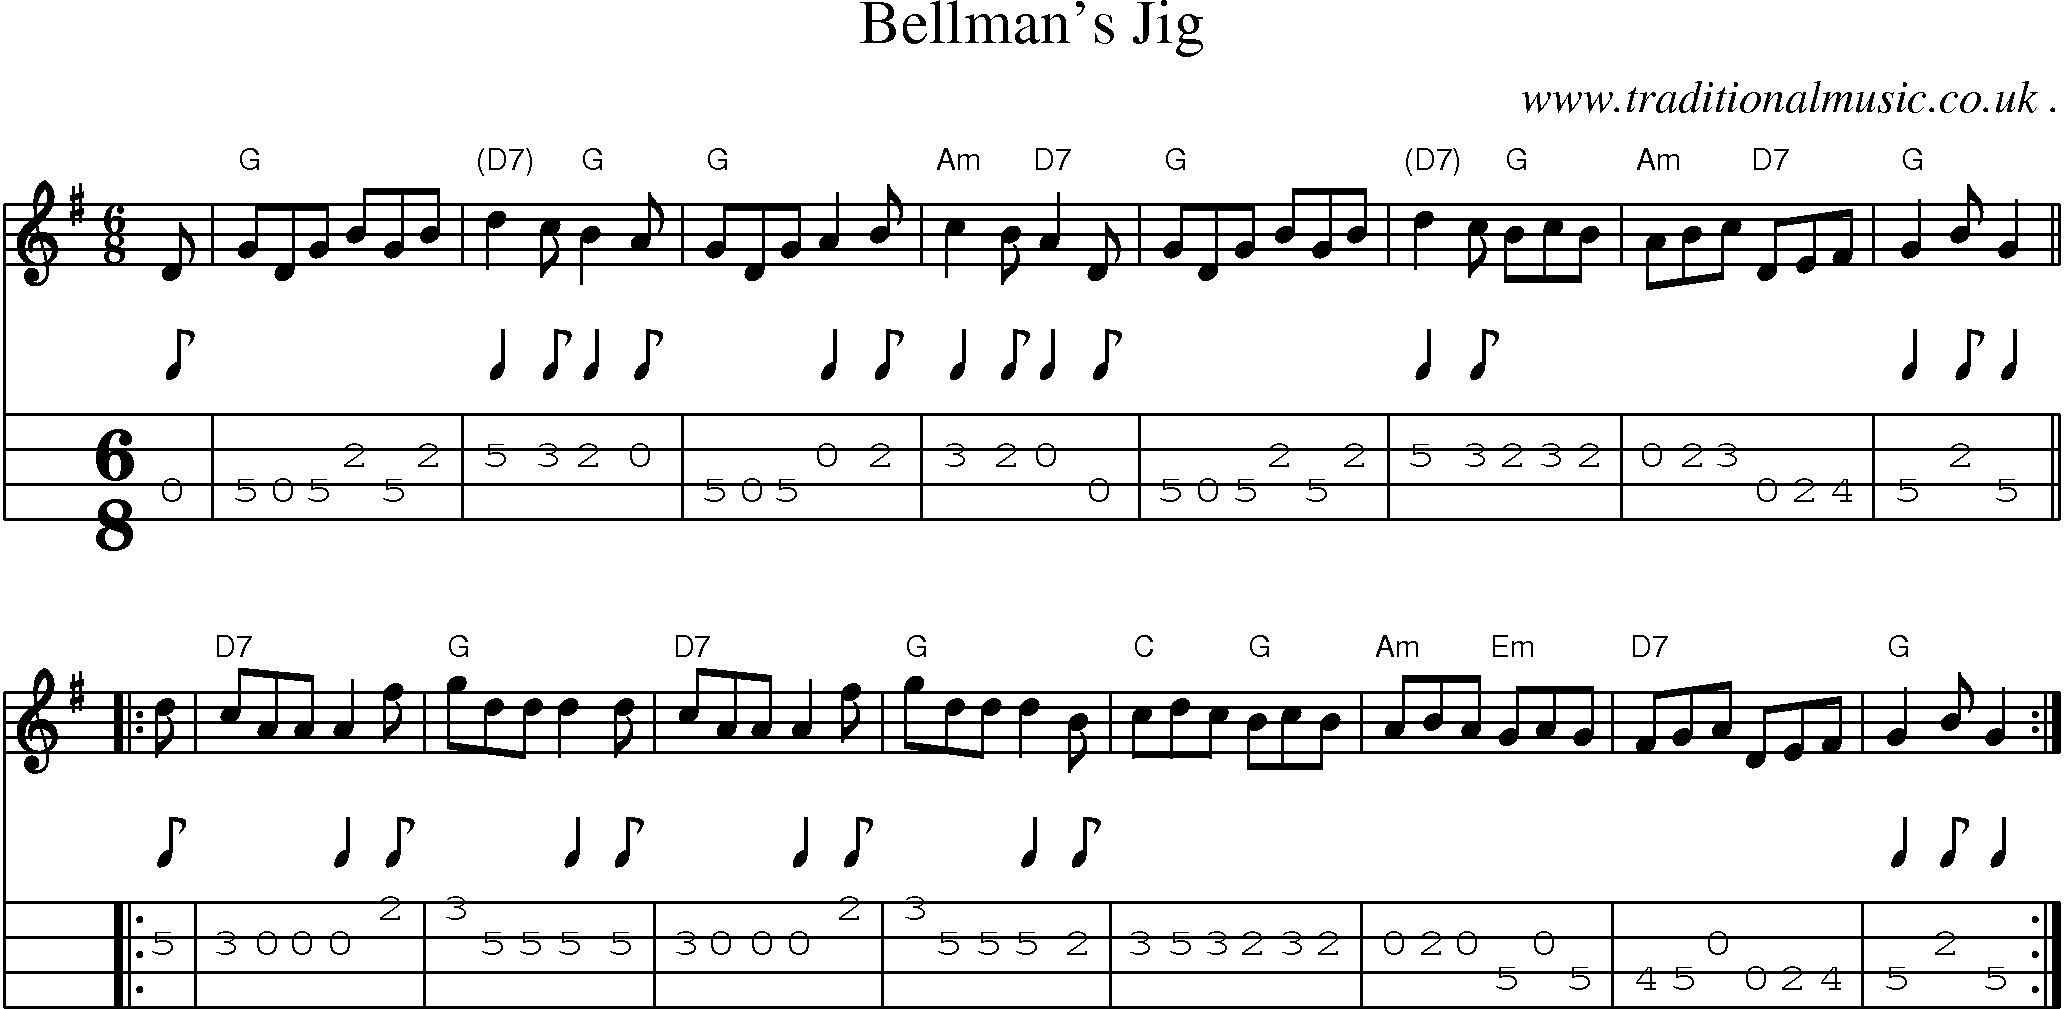 Sheet-music  score, Chords and Mandolin Tabs for Bellmans Jig